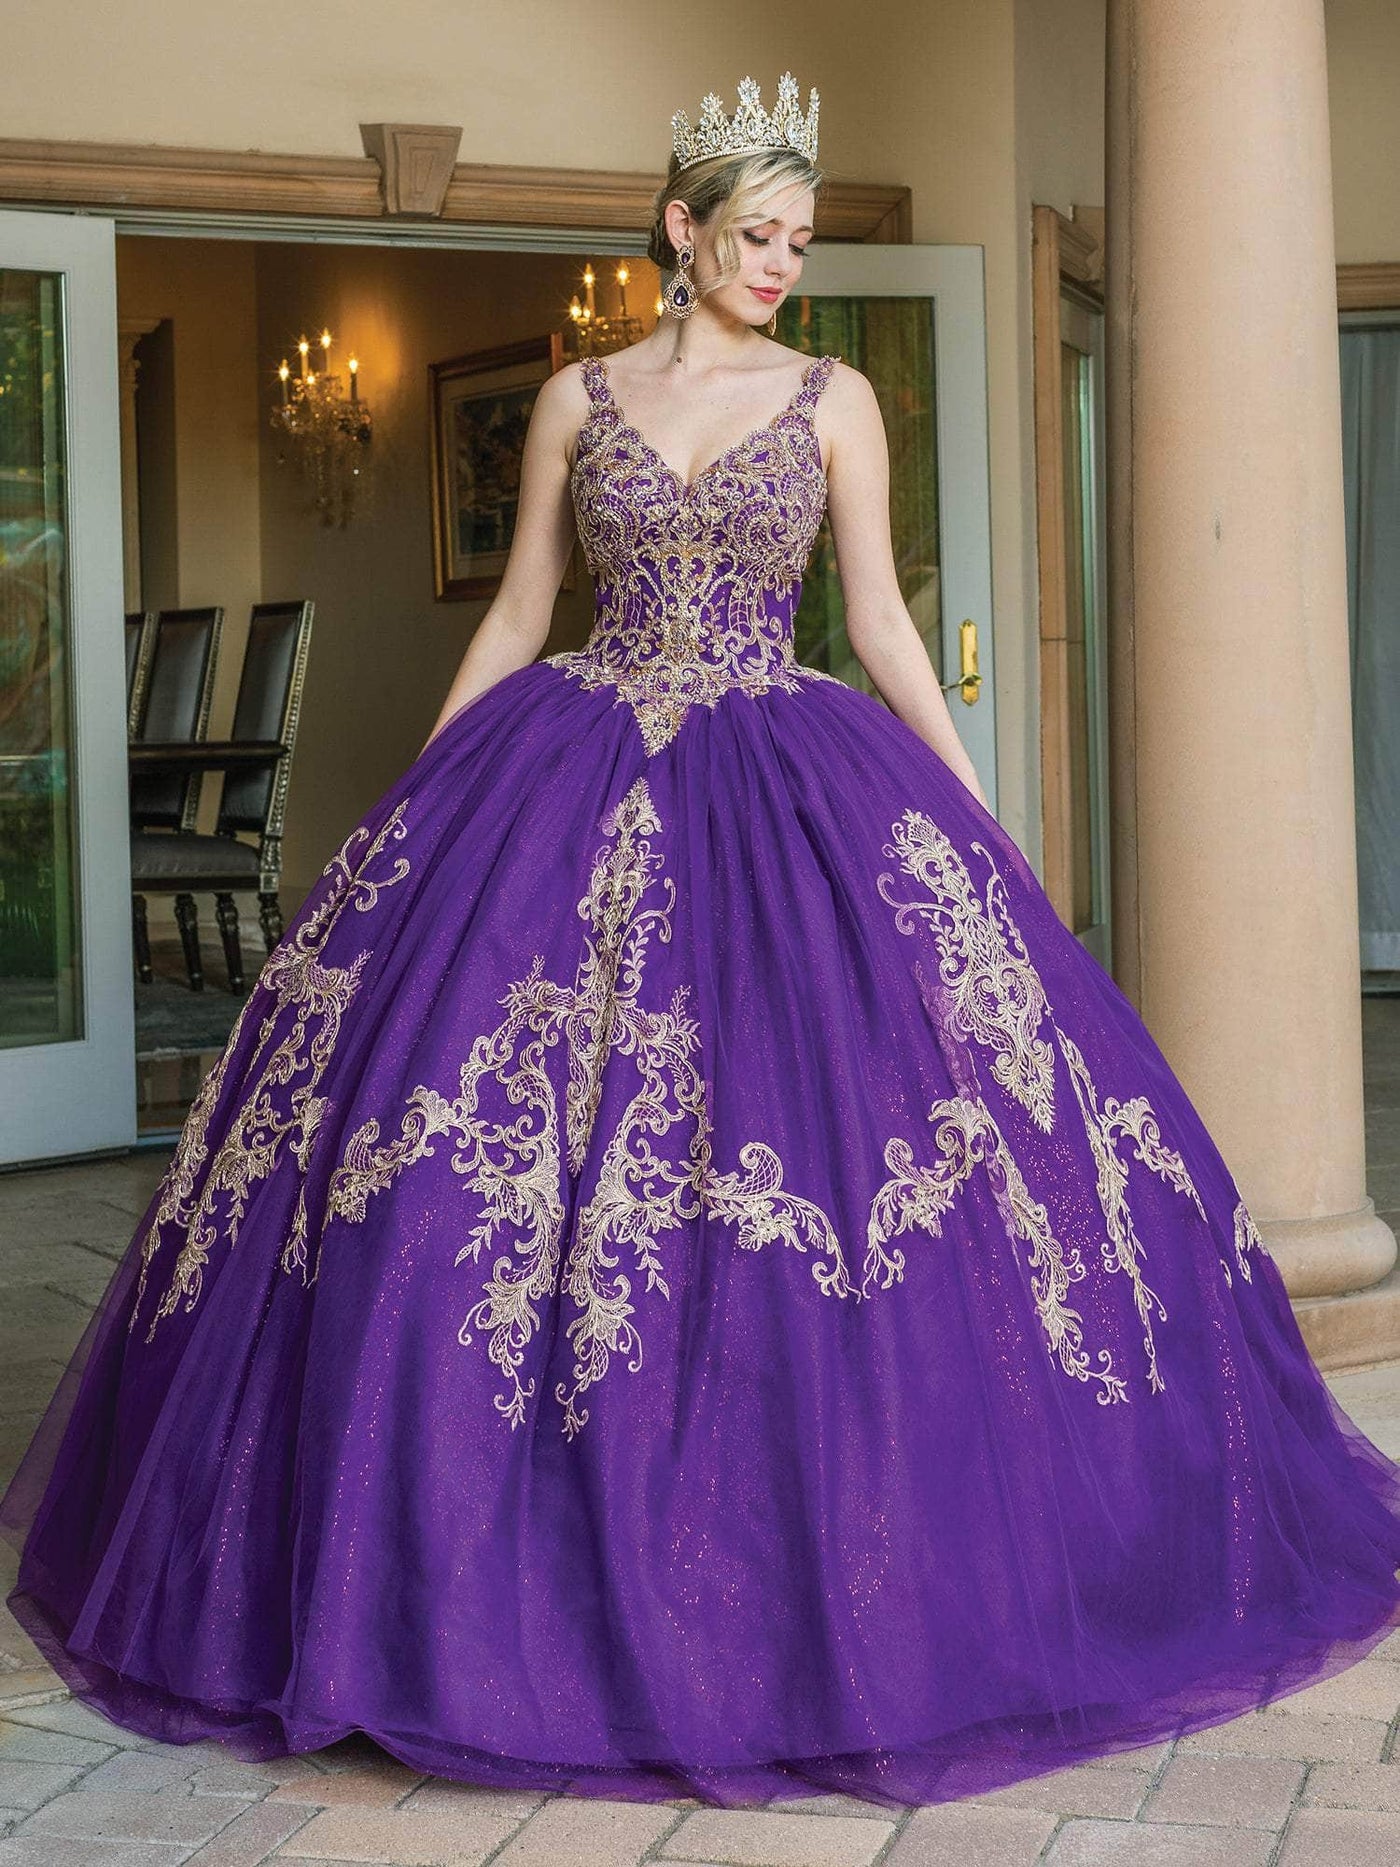 Dancing Queen 1635 - V-Neck Lace Appliqued Ballgown Ball Gowns